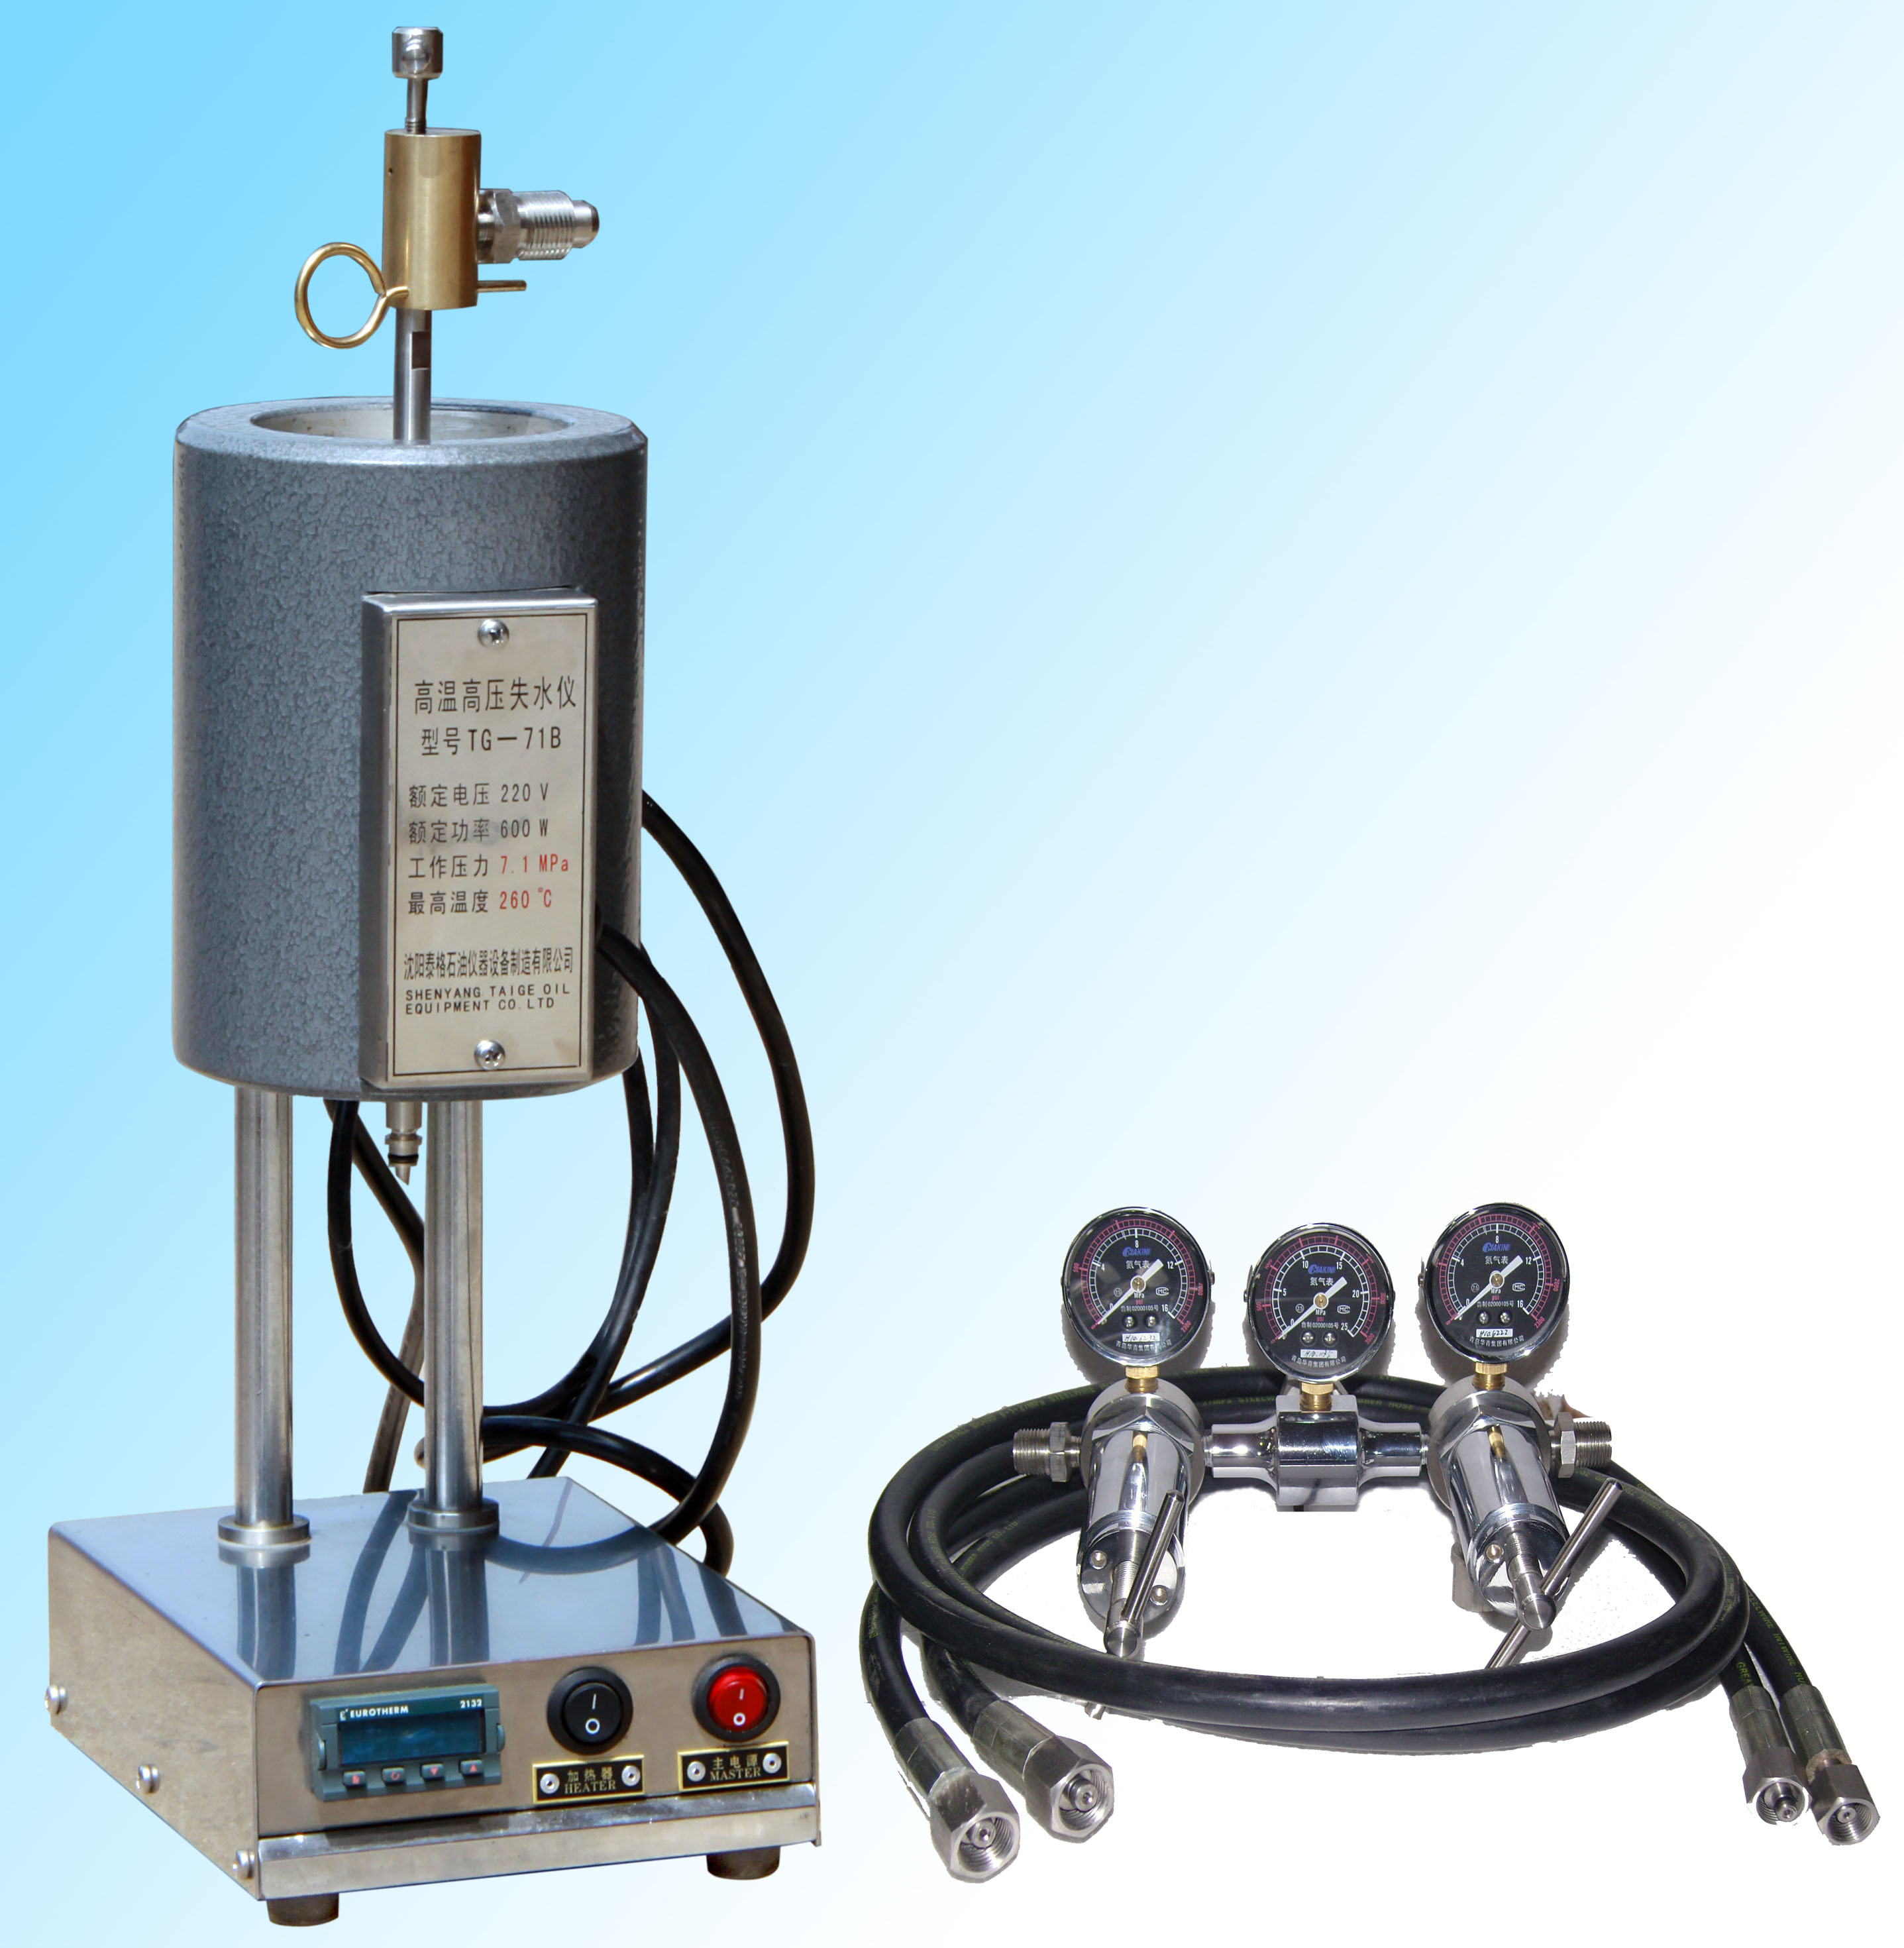 HTHP Fluid Loss Tester, 175ml Featured Image